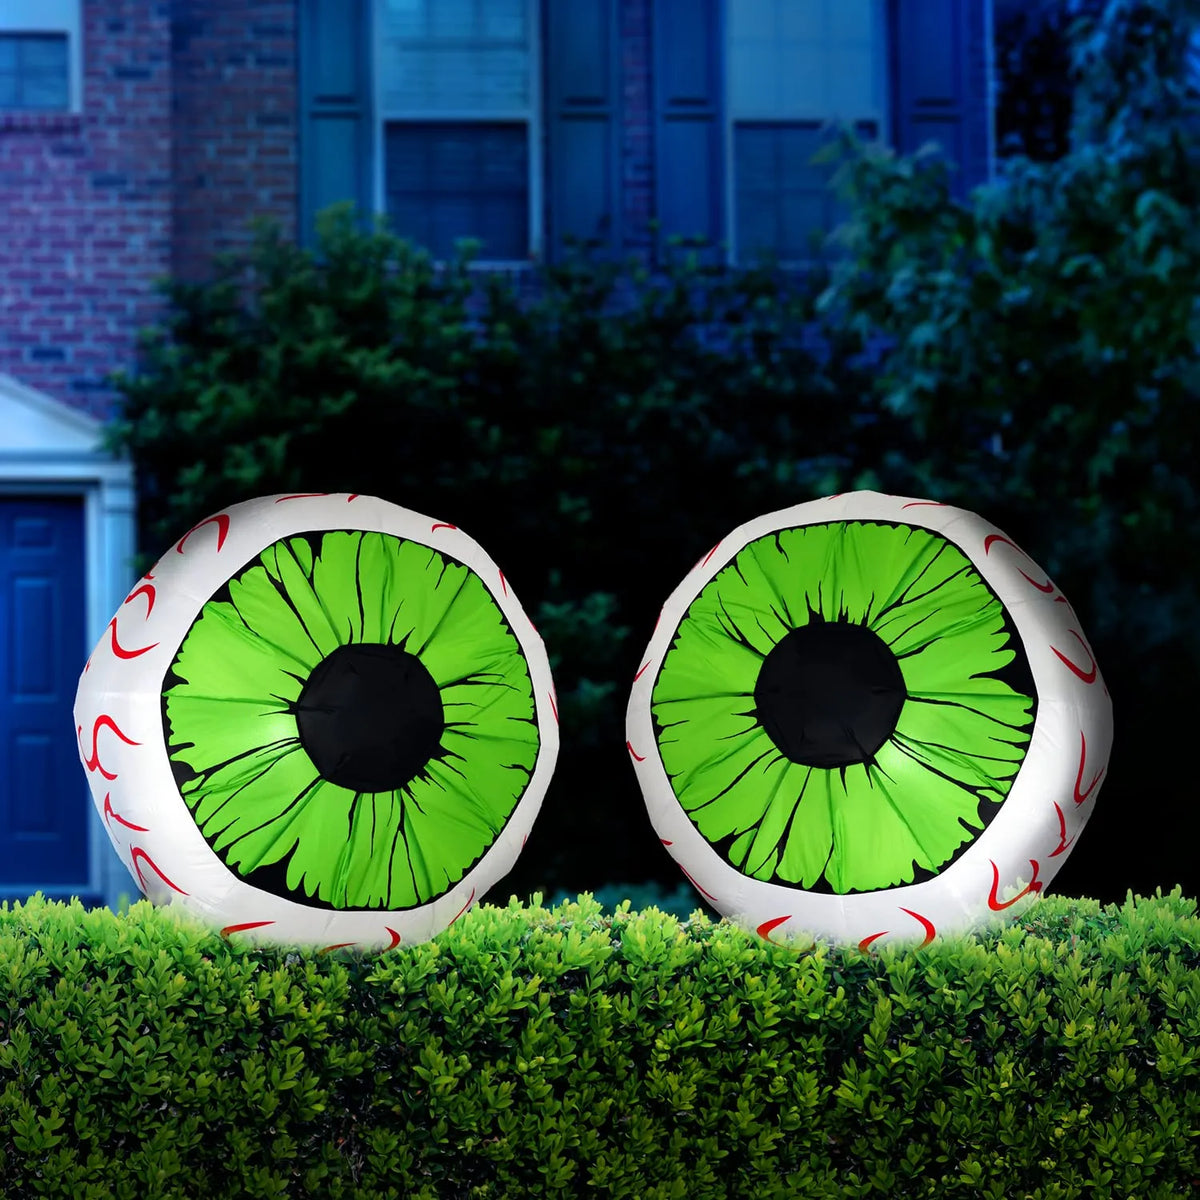 How Do Blow-Up Halloween Decorations Work?